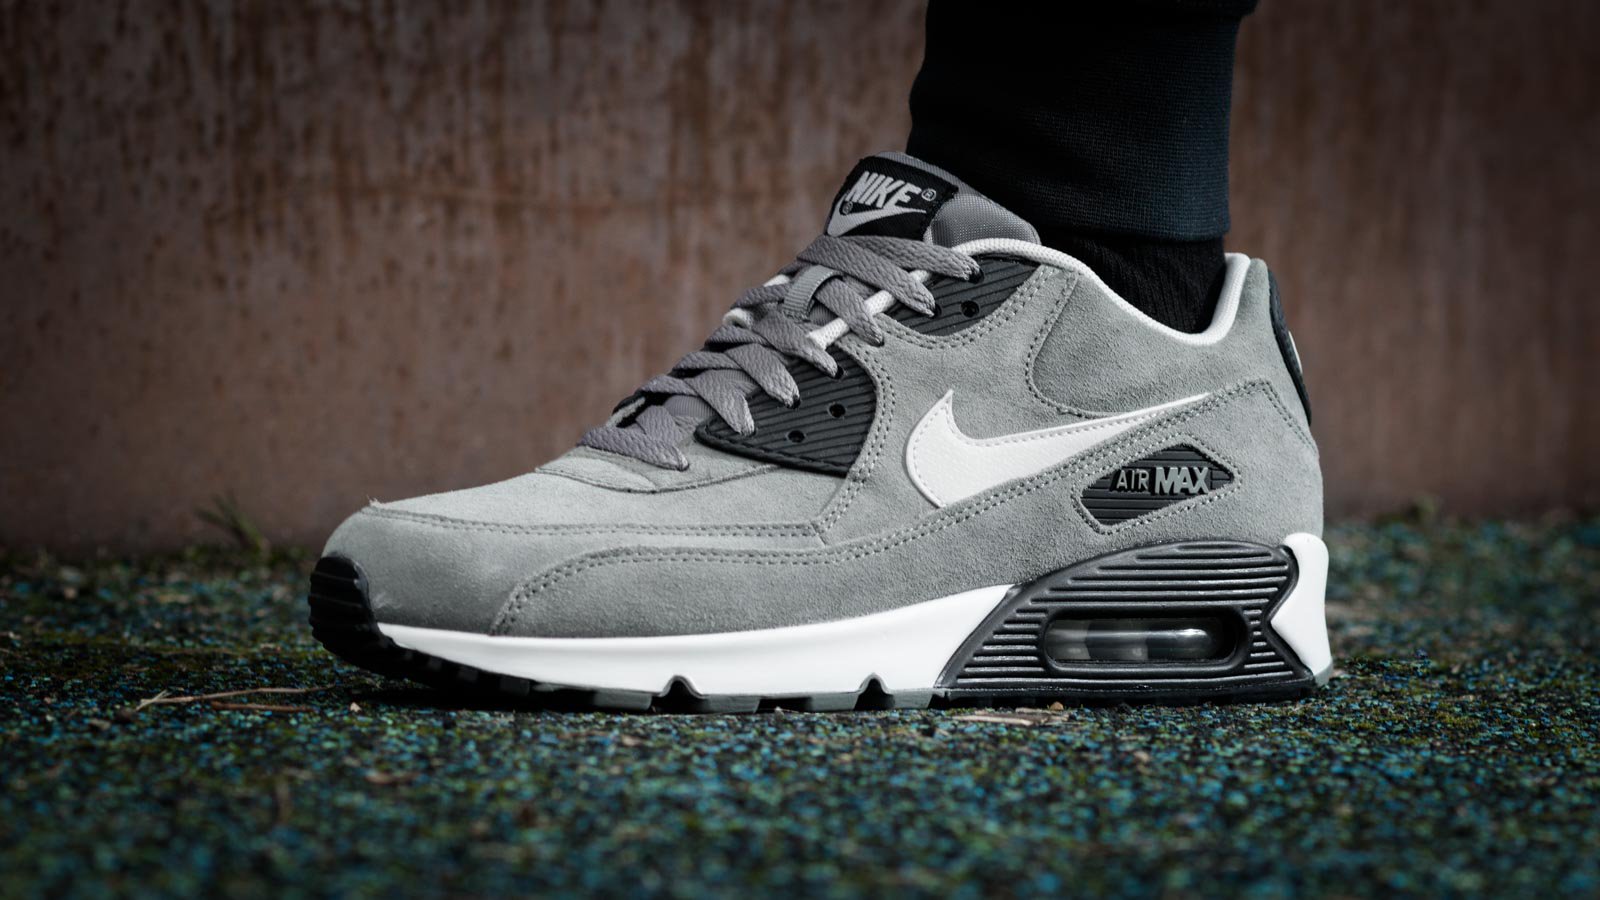 Foot Locker EU on Twitter: "Get your feet into the Nike #AirMax 90 Leather Grey, now available https://t.co/bteF2utUlJ" / Twitter